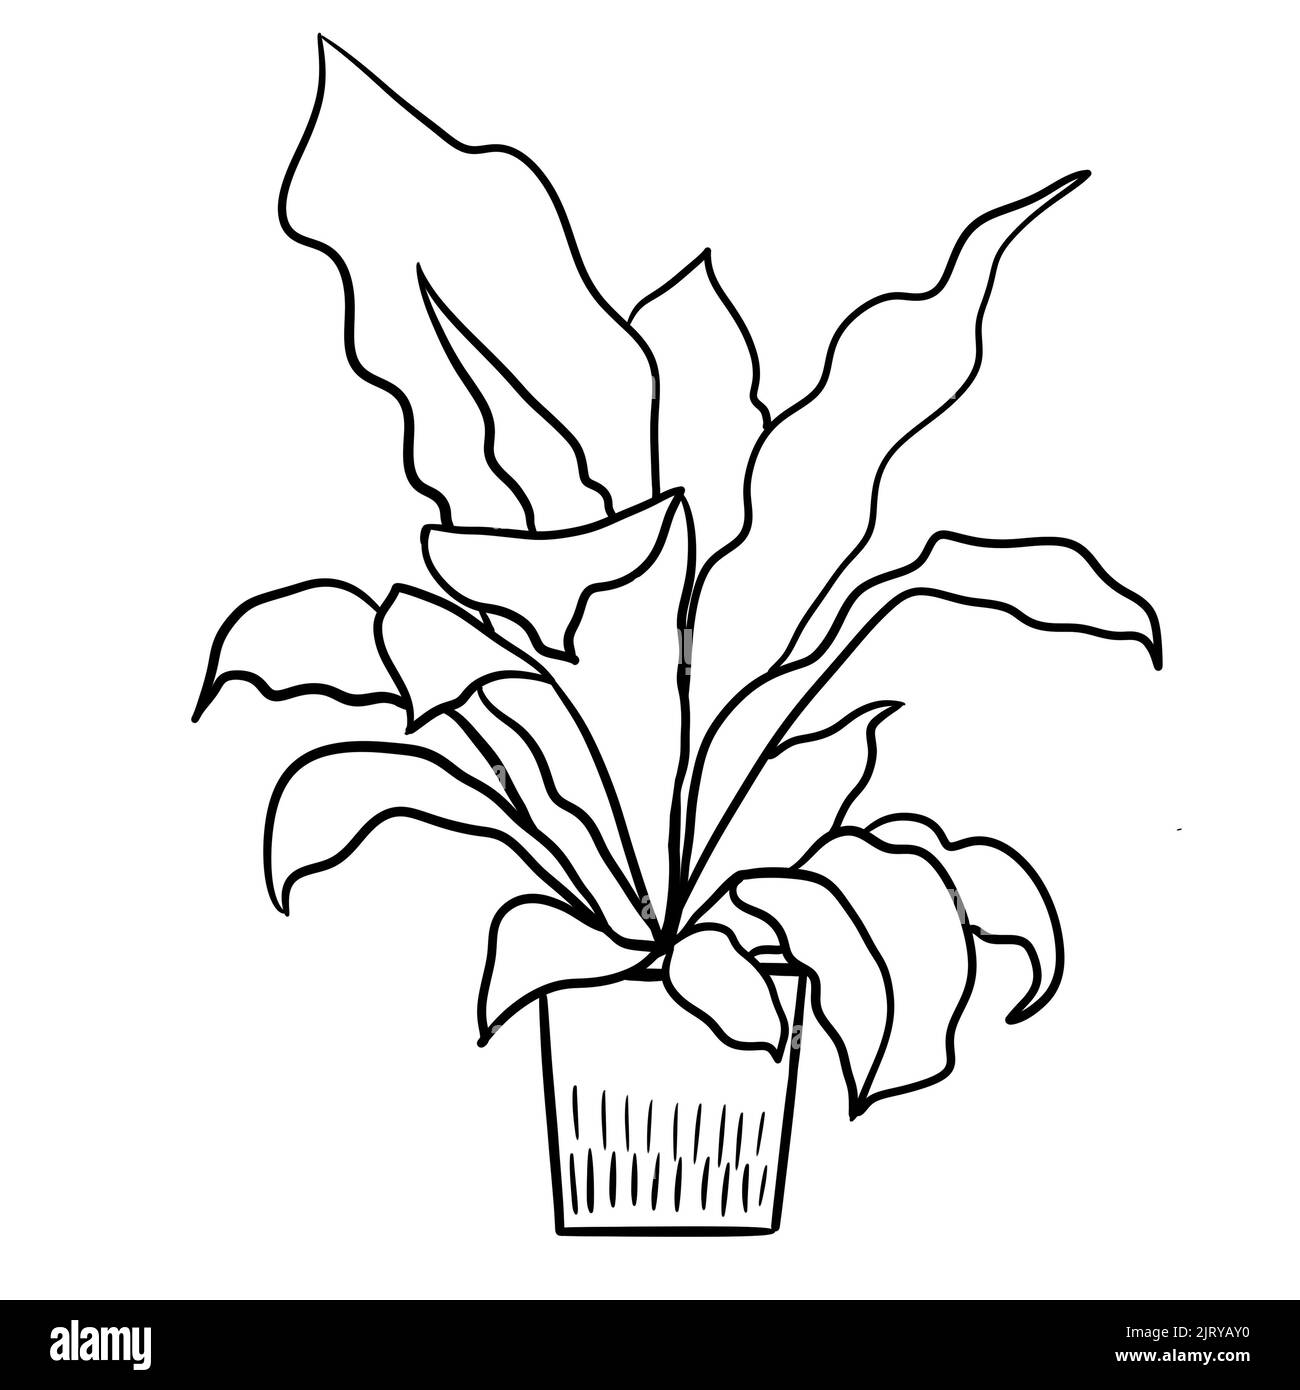 Fern asplenium in a pot in black line outline cartoon style. Coloring book houseplants flowers plant for interrior design in simple minimalist design, plant lady gift Stock Photo